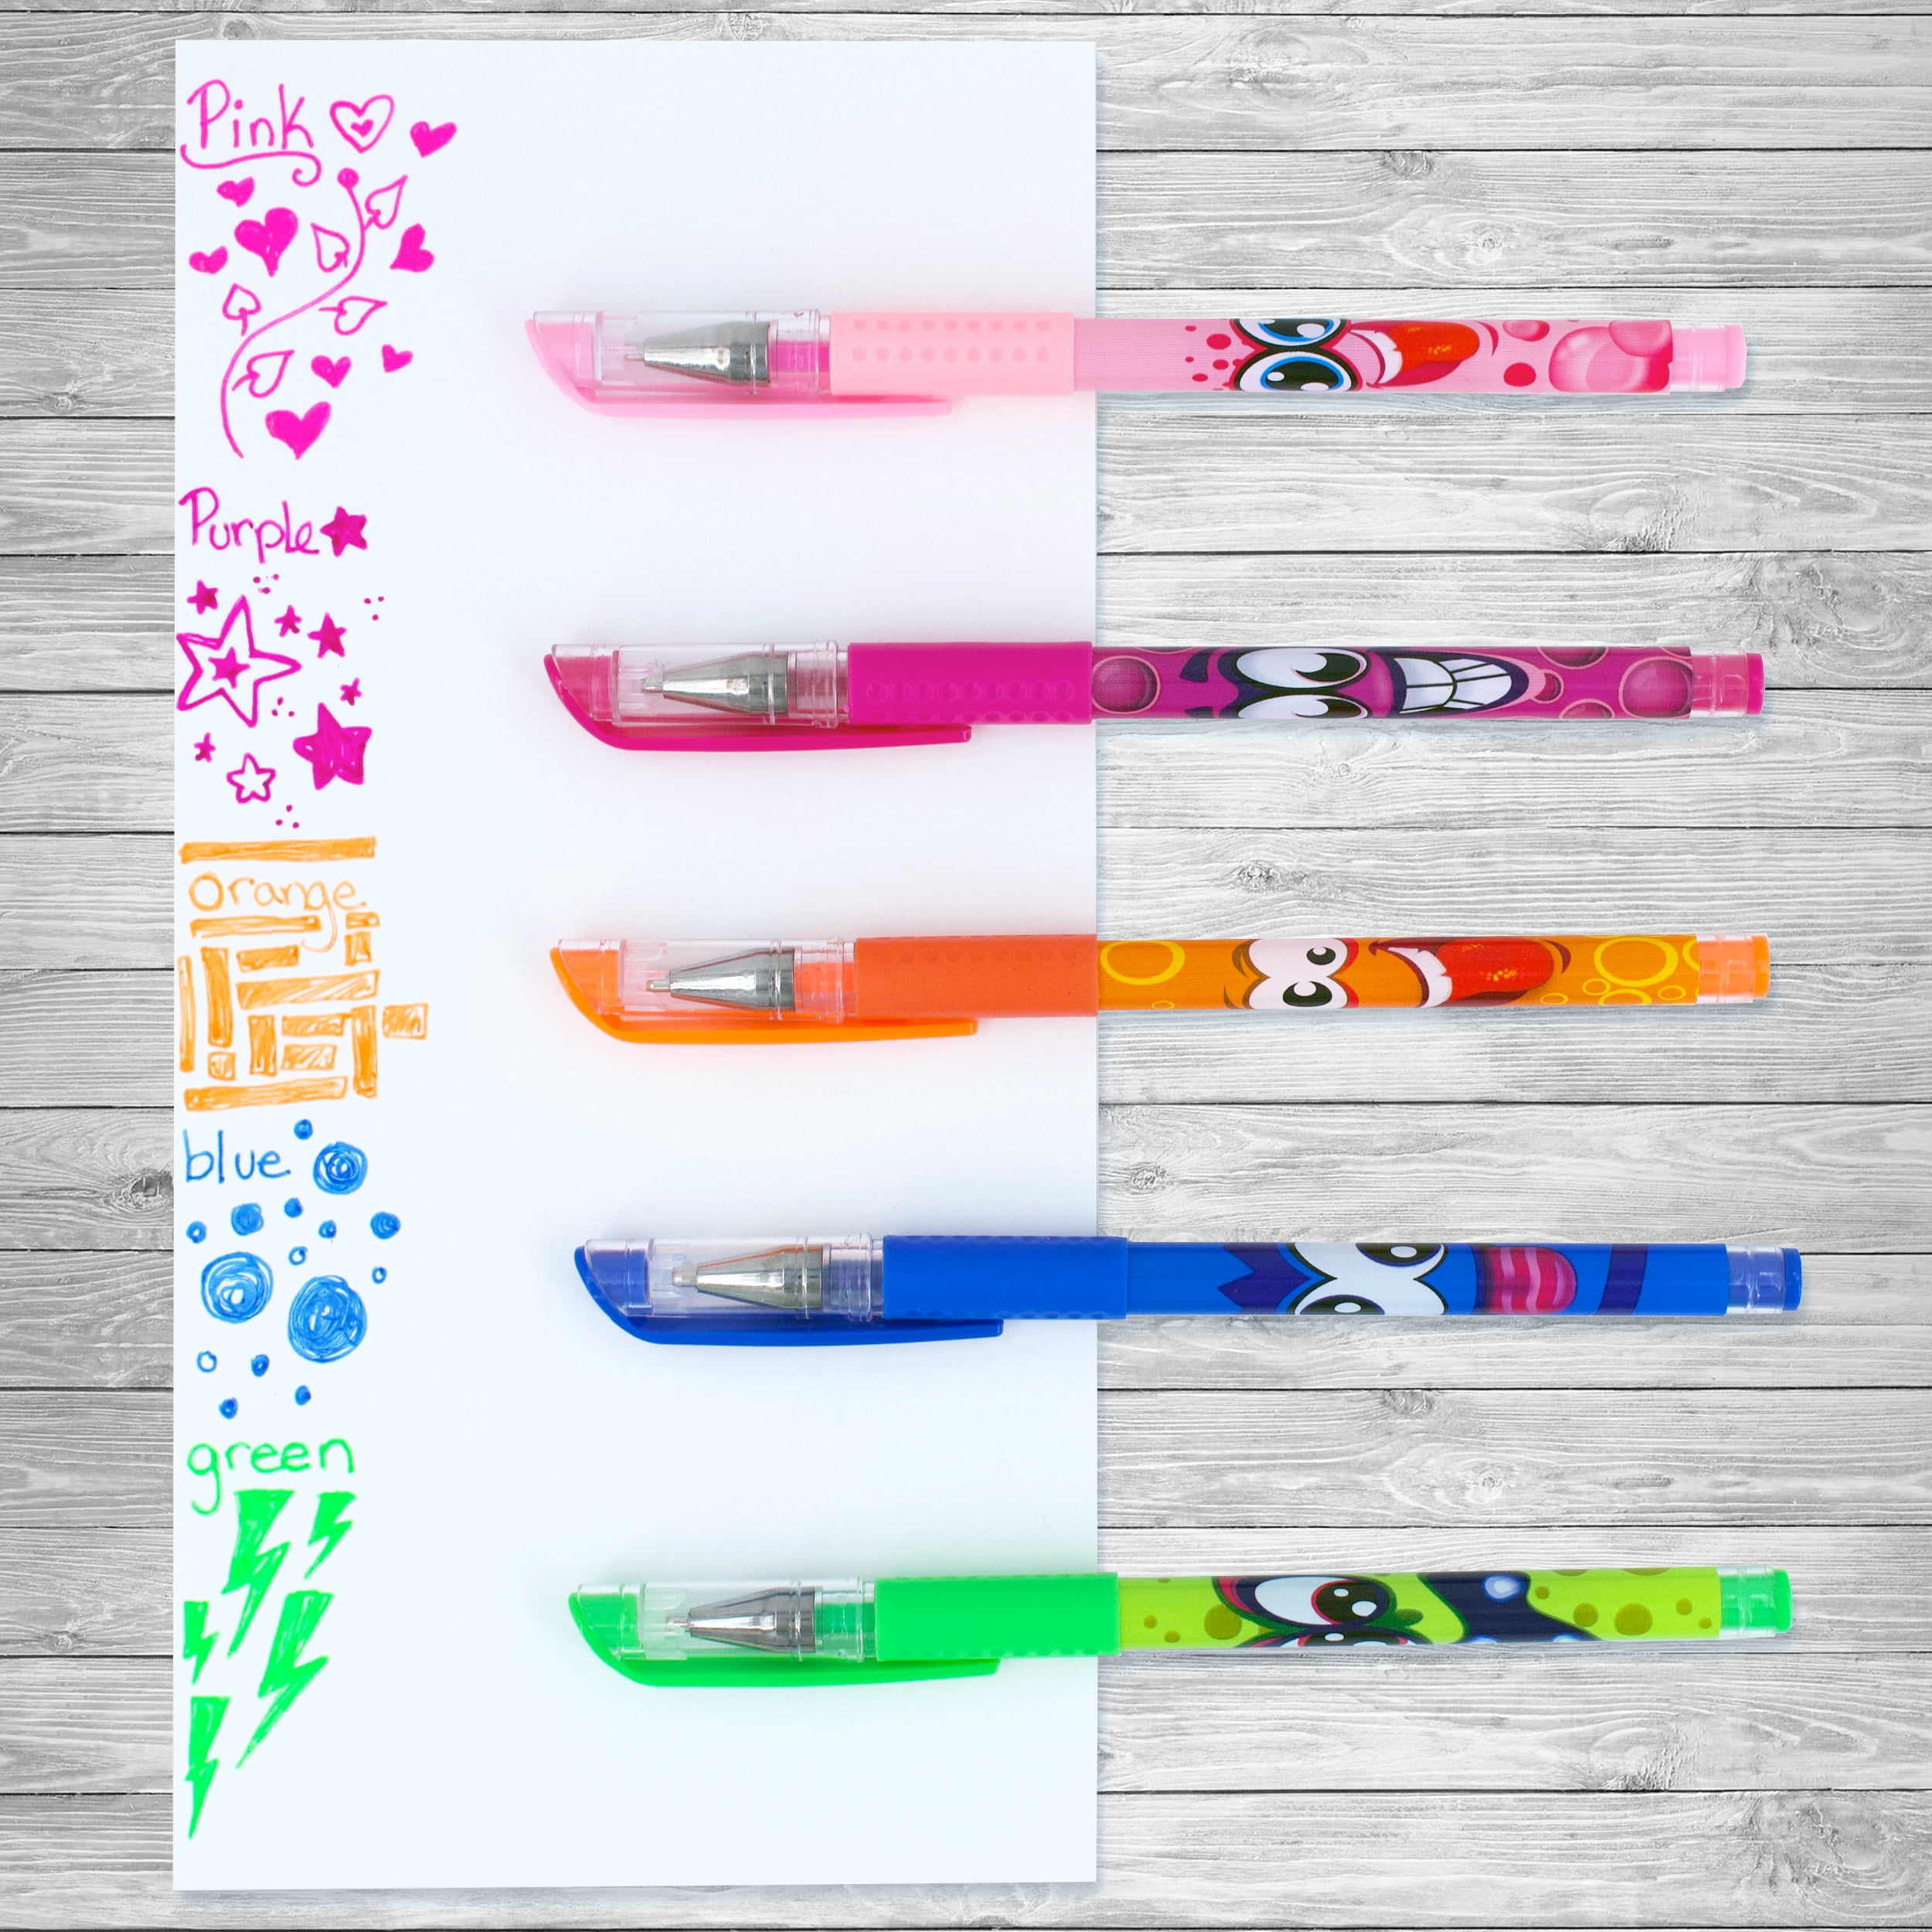  Scentos Scented Gel Pens for Kids - Assorted Colorful Pens -  Fine Point Gel Pen Set - For Ages 3 and Up - 24 Count : Office Products